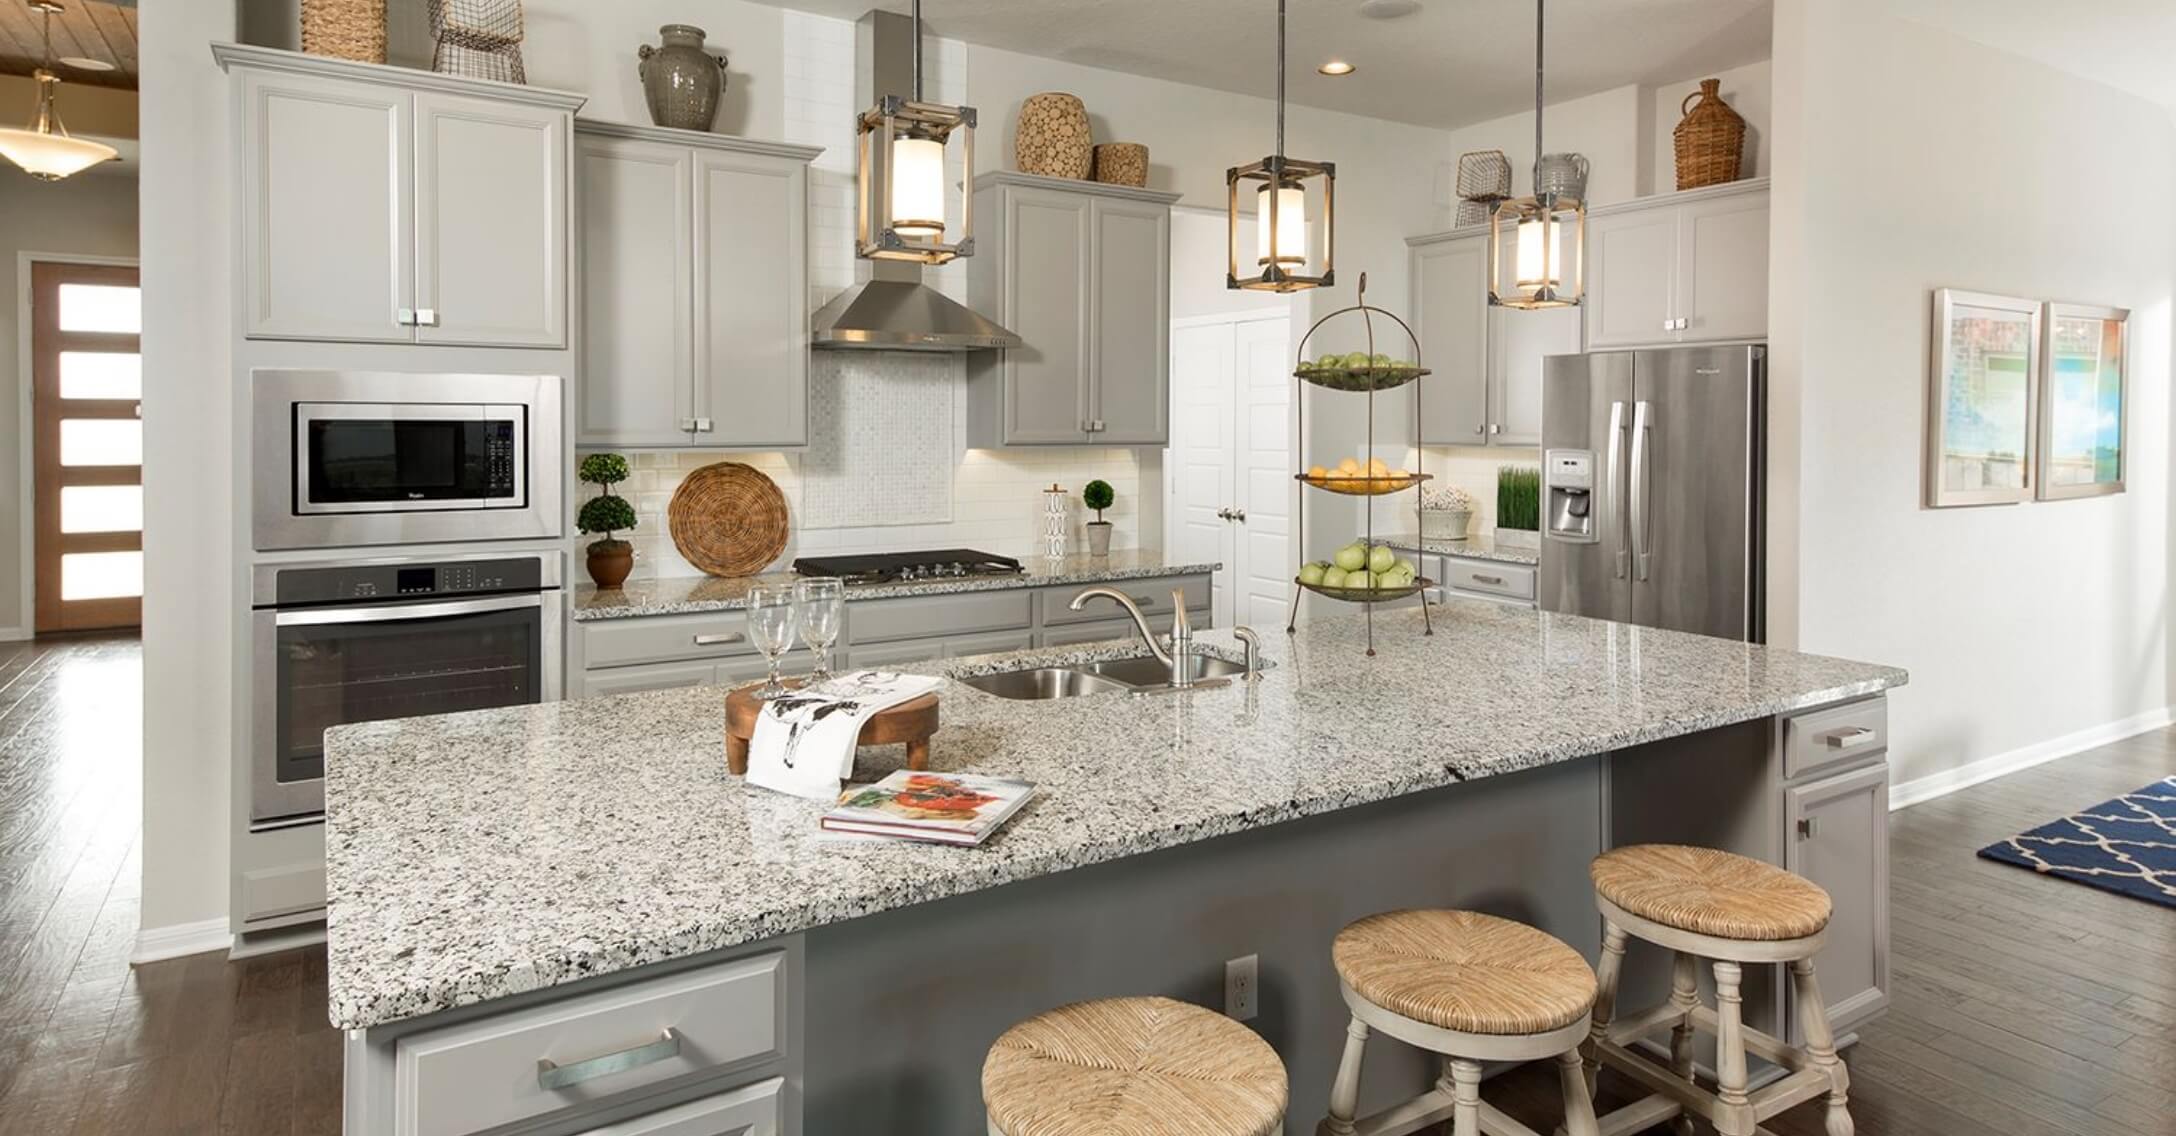 A kitchen with granite counter tops and stainless steel appliances in new homes in New Braunfels by Mayfair homes.